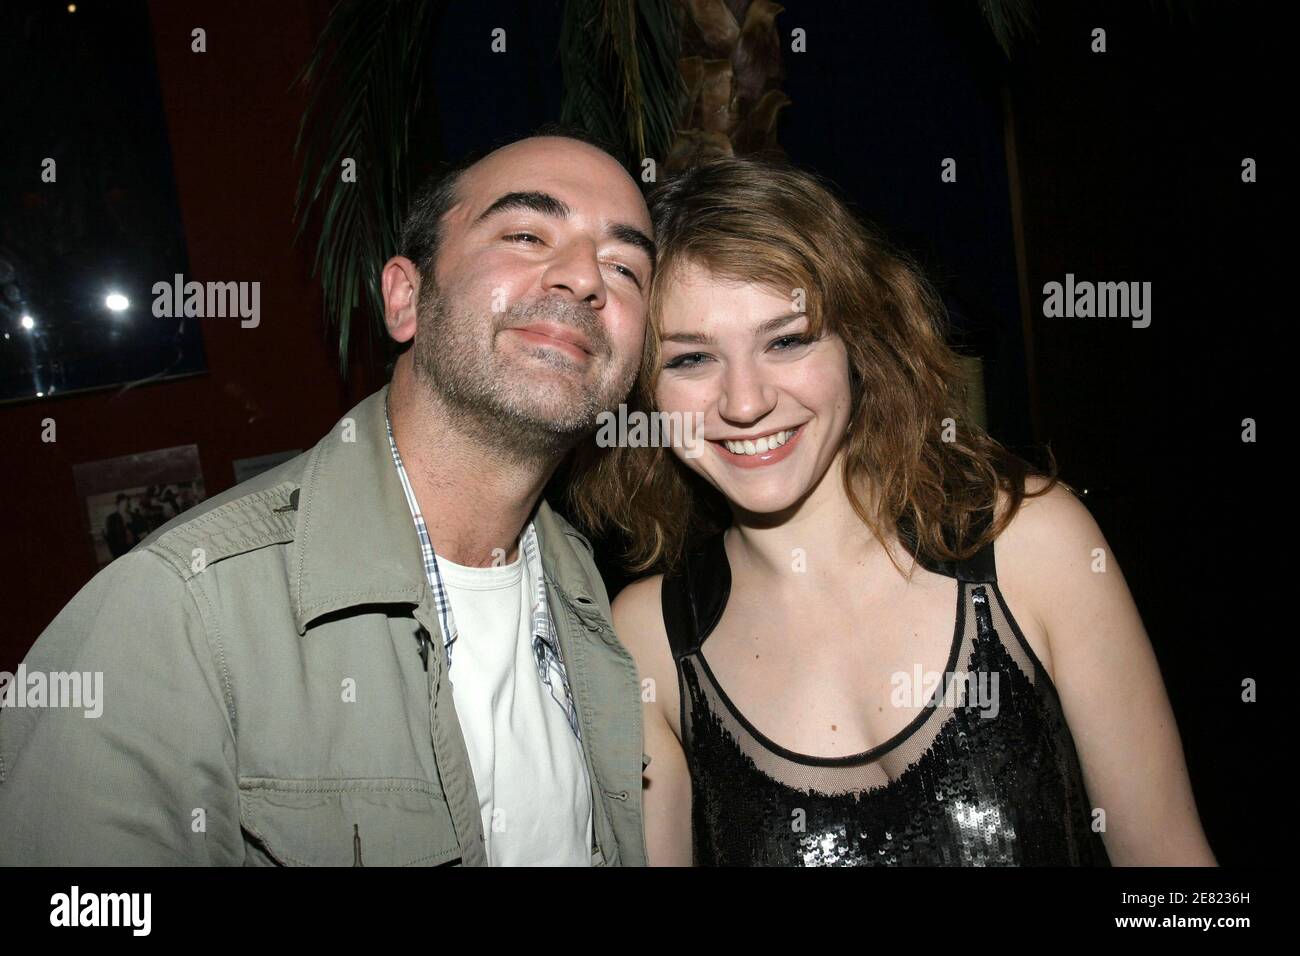 French actors Bruno Solo and Emilie Dequenne attend 'Ecoute le temps' premiere held at the Planete Hollywood Restaurant in Paris, France on June 1st, 2007. Photo by Benoit Pinguet/ABACAPRESS.COM Stock Photo